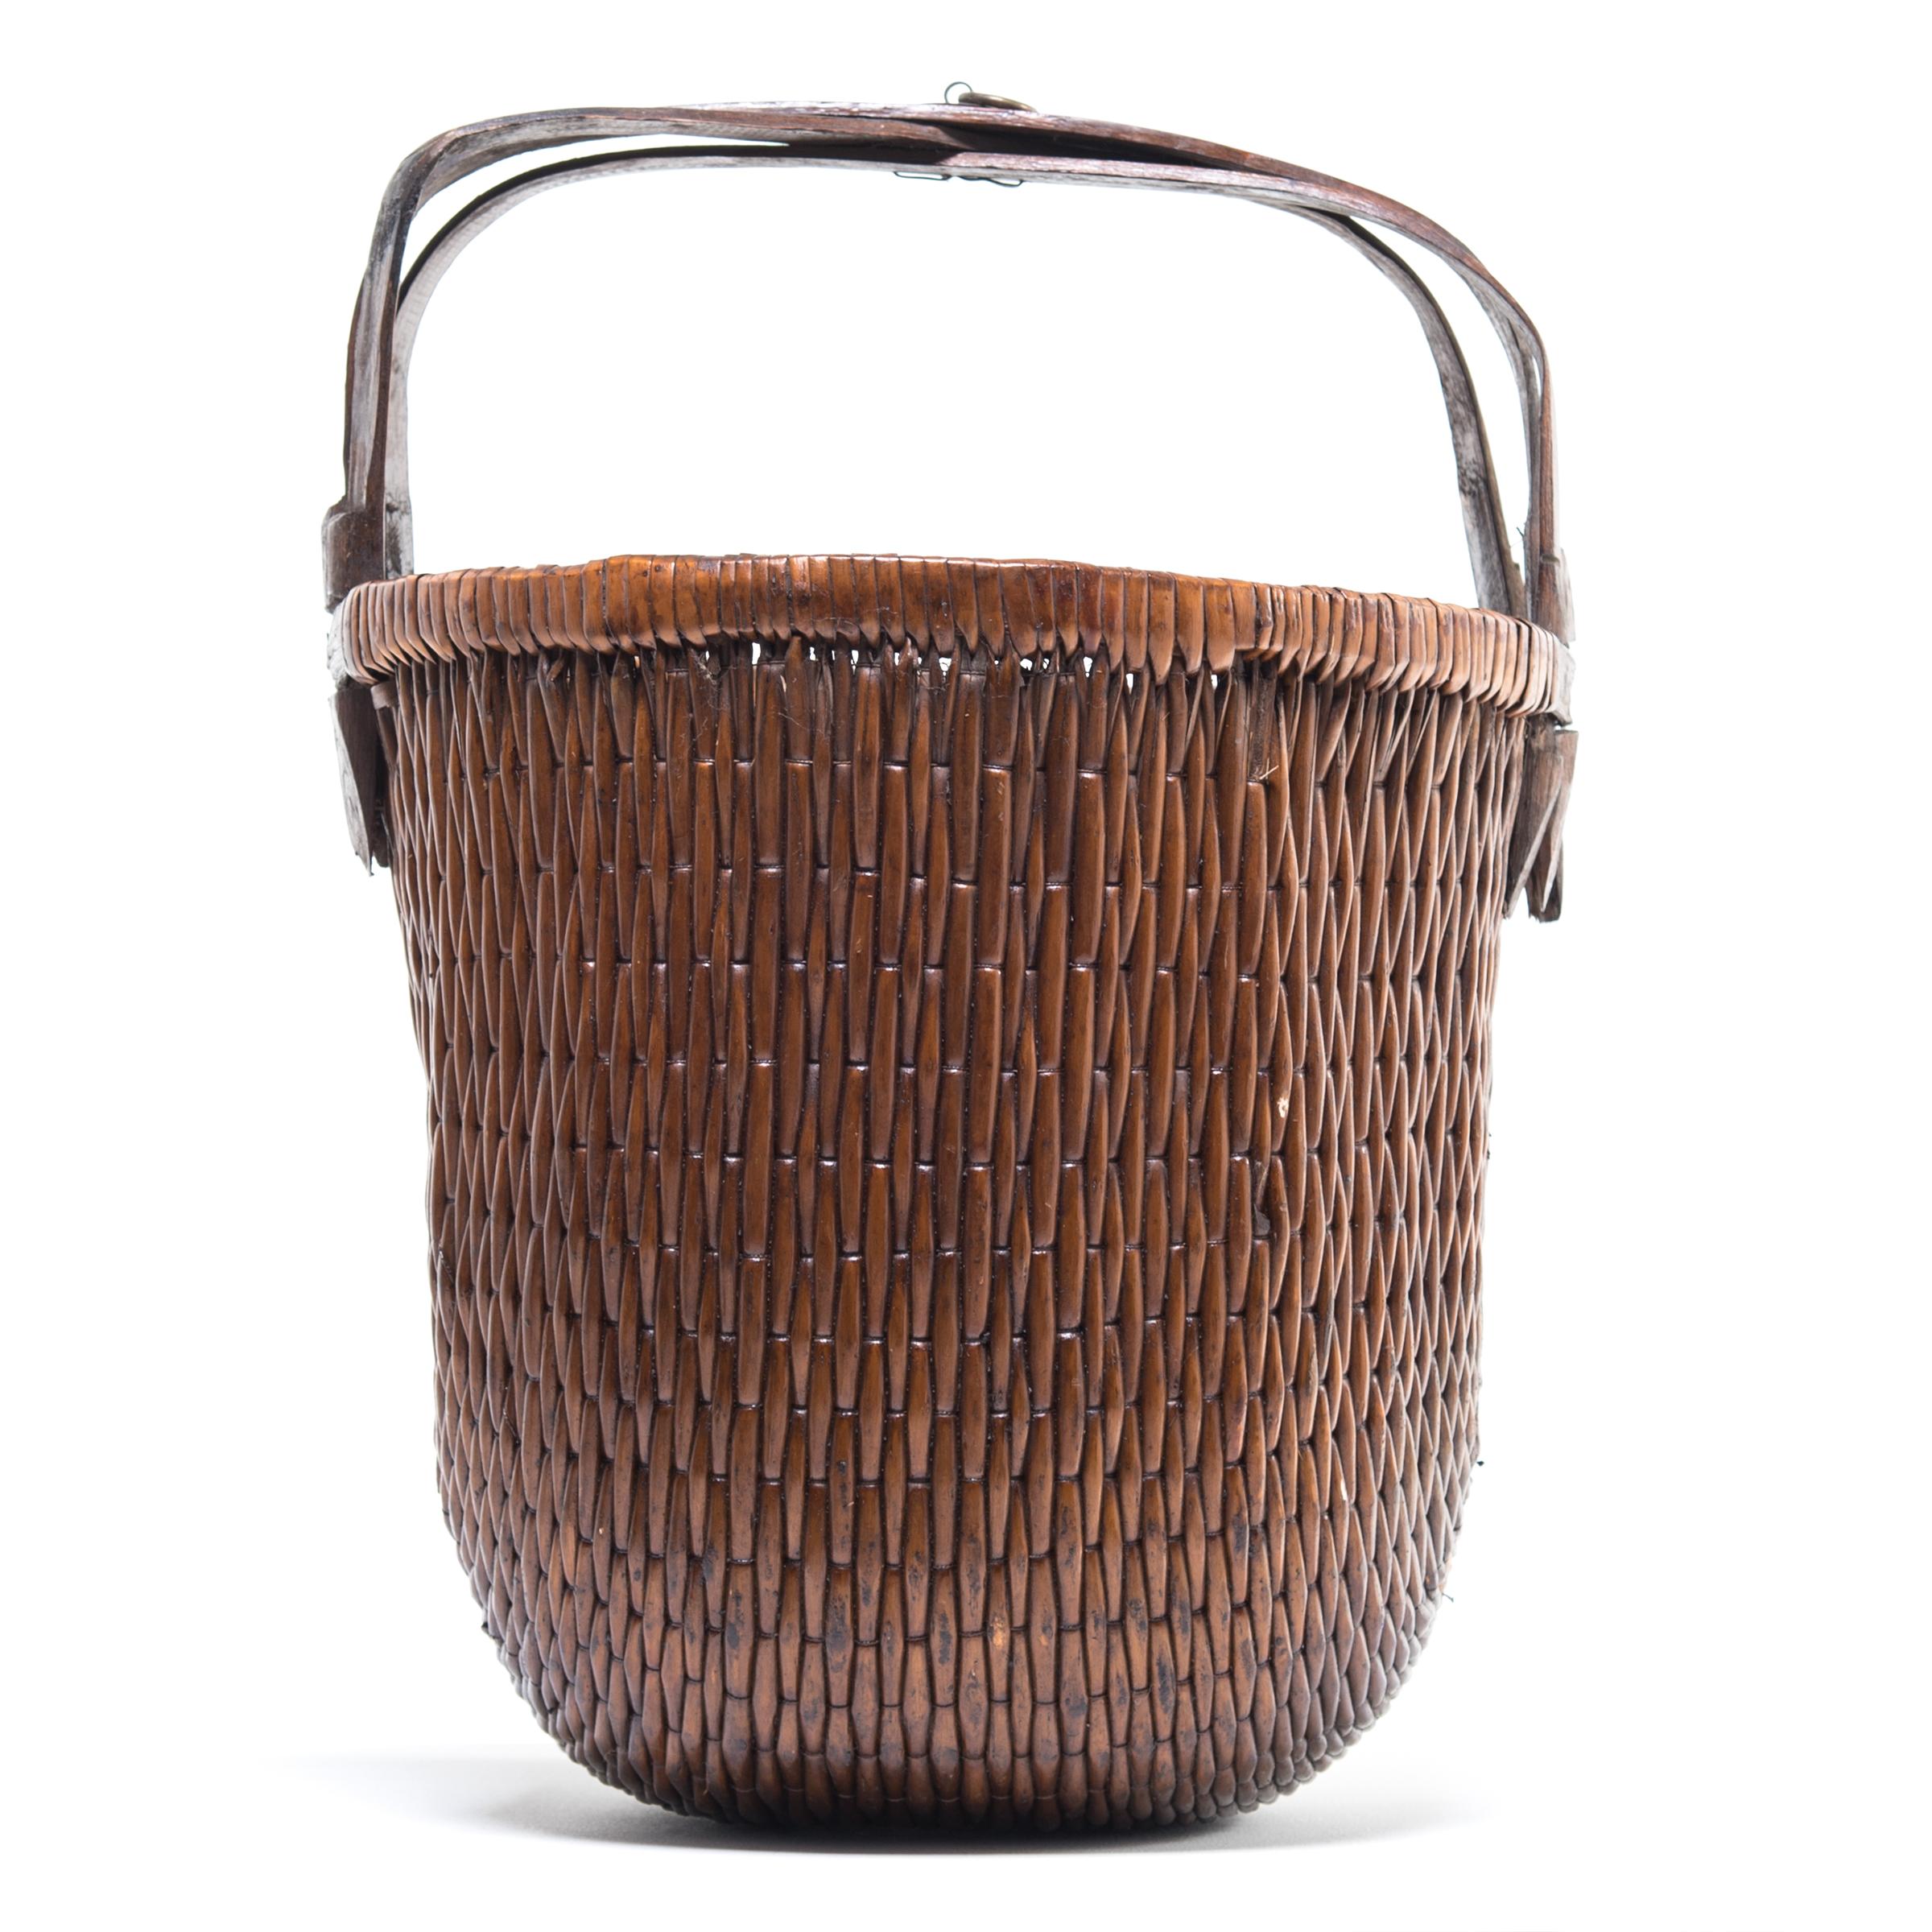 Rustic Early 20th Century Chinese Bent Handle Willow Basket